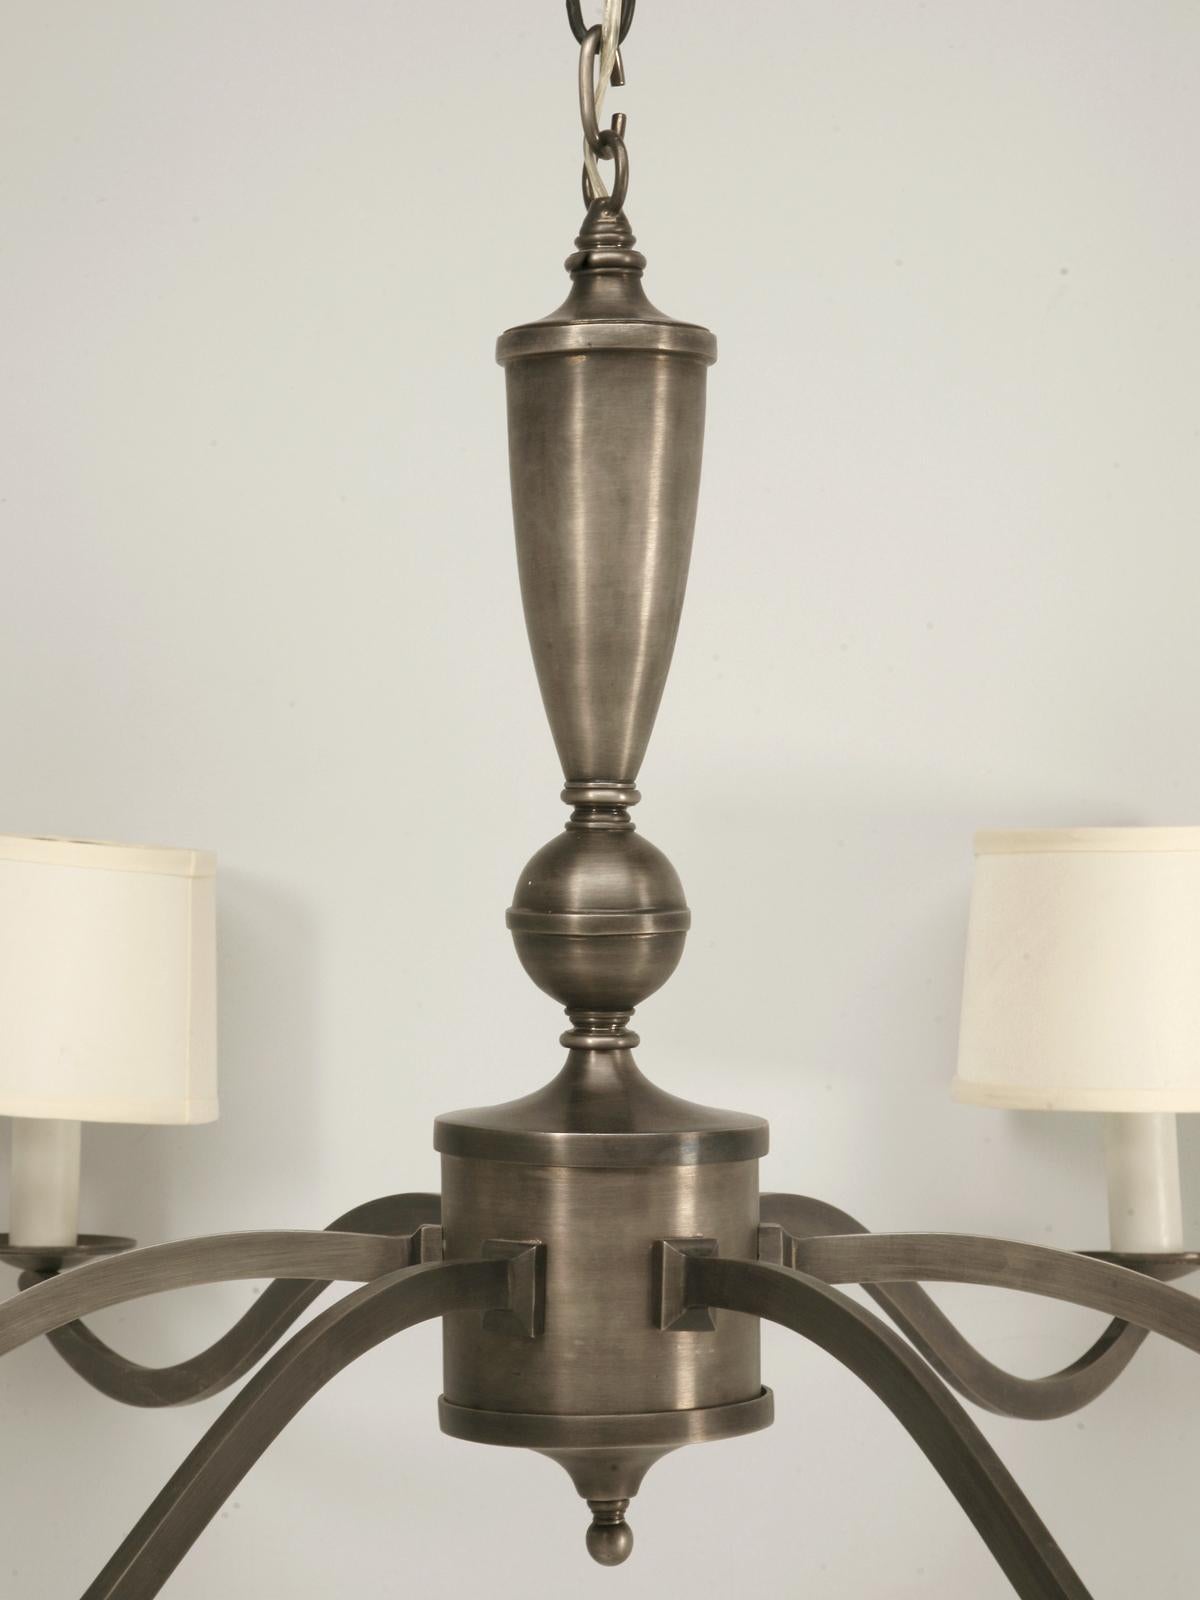 Unique large-scale transitional pewter chandelier. Although this fine chandelier has a diameter of 4 feet, it offers plenty of charm and character without overpowering the room. N.O.S. meaning, new old stock, but manufactured many years ago.